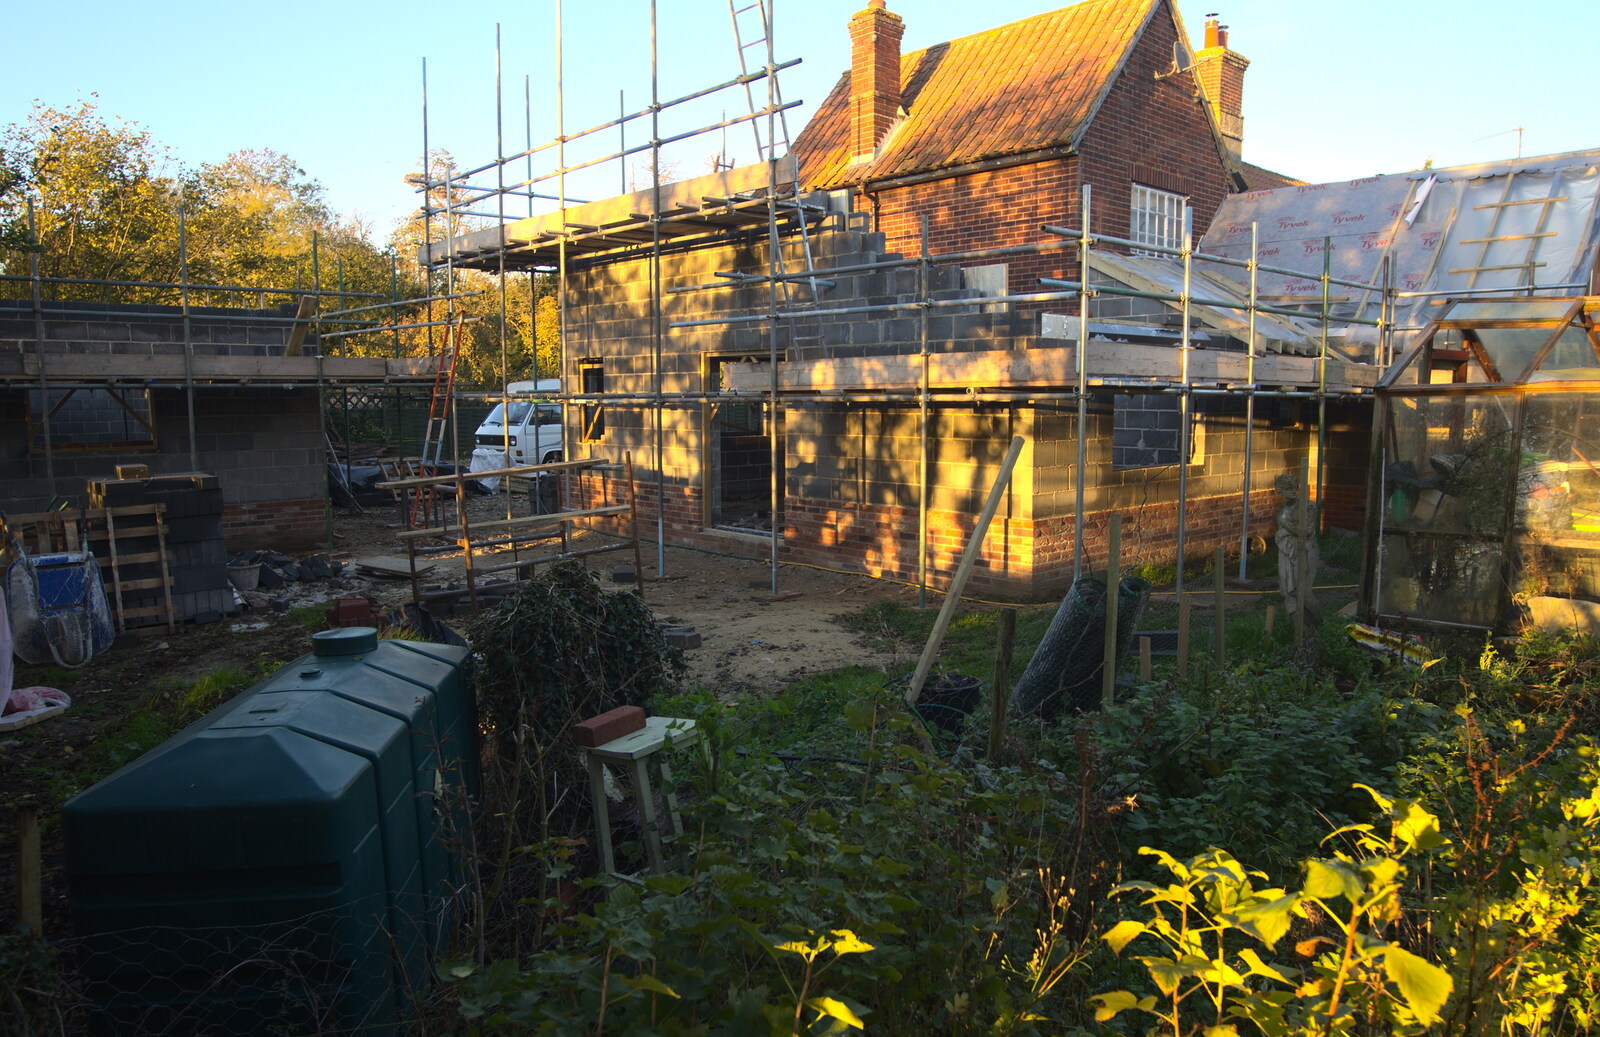 It's a building site alright from A November Miscellany and Building Progress, Thornham and Brome, Suffolk - 17th November 2013